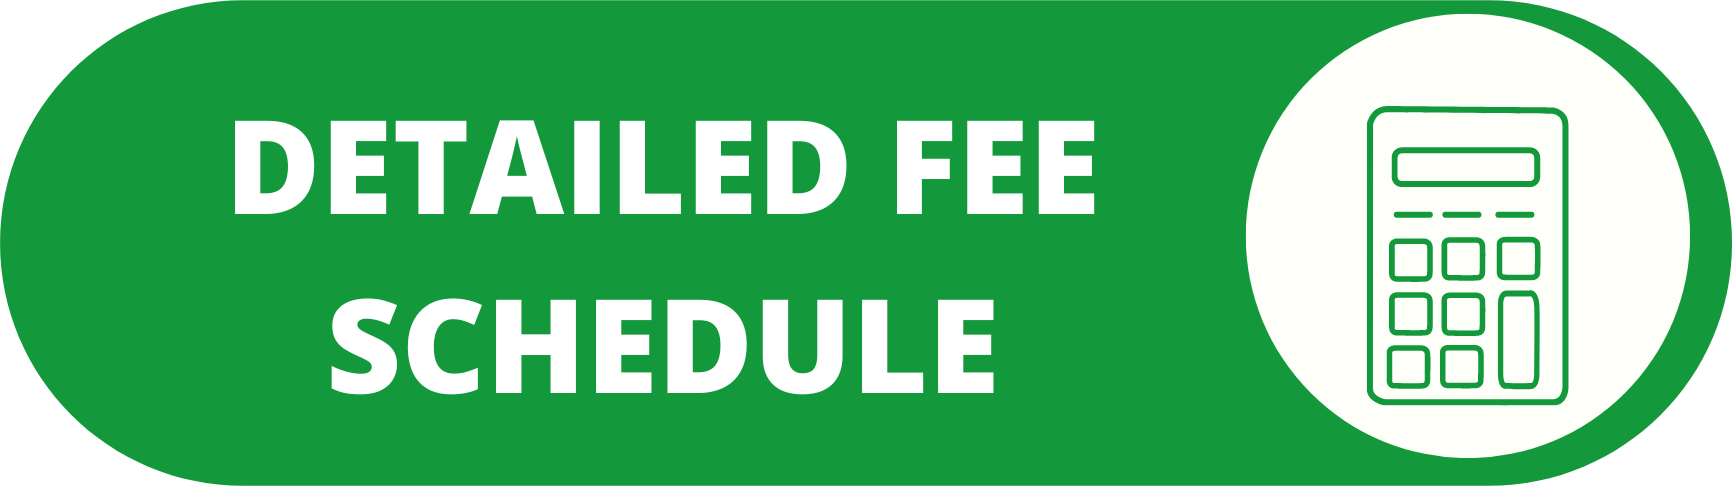 go to fee-schedule page